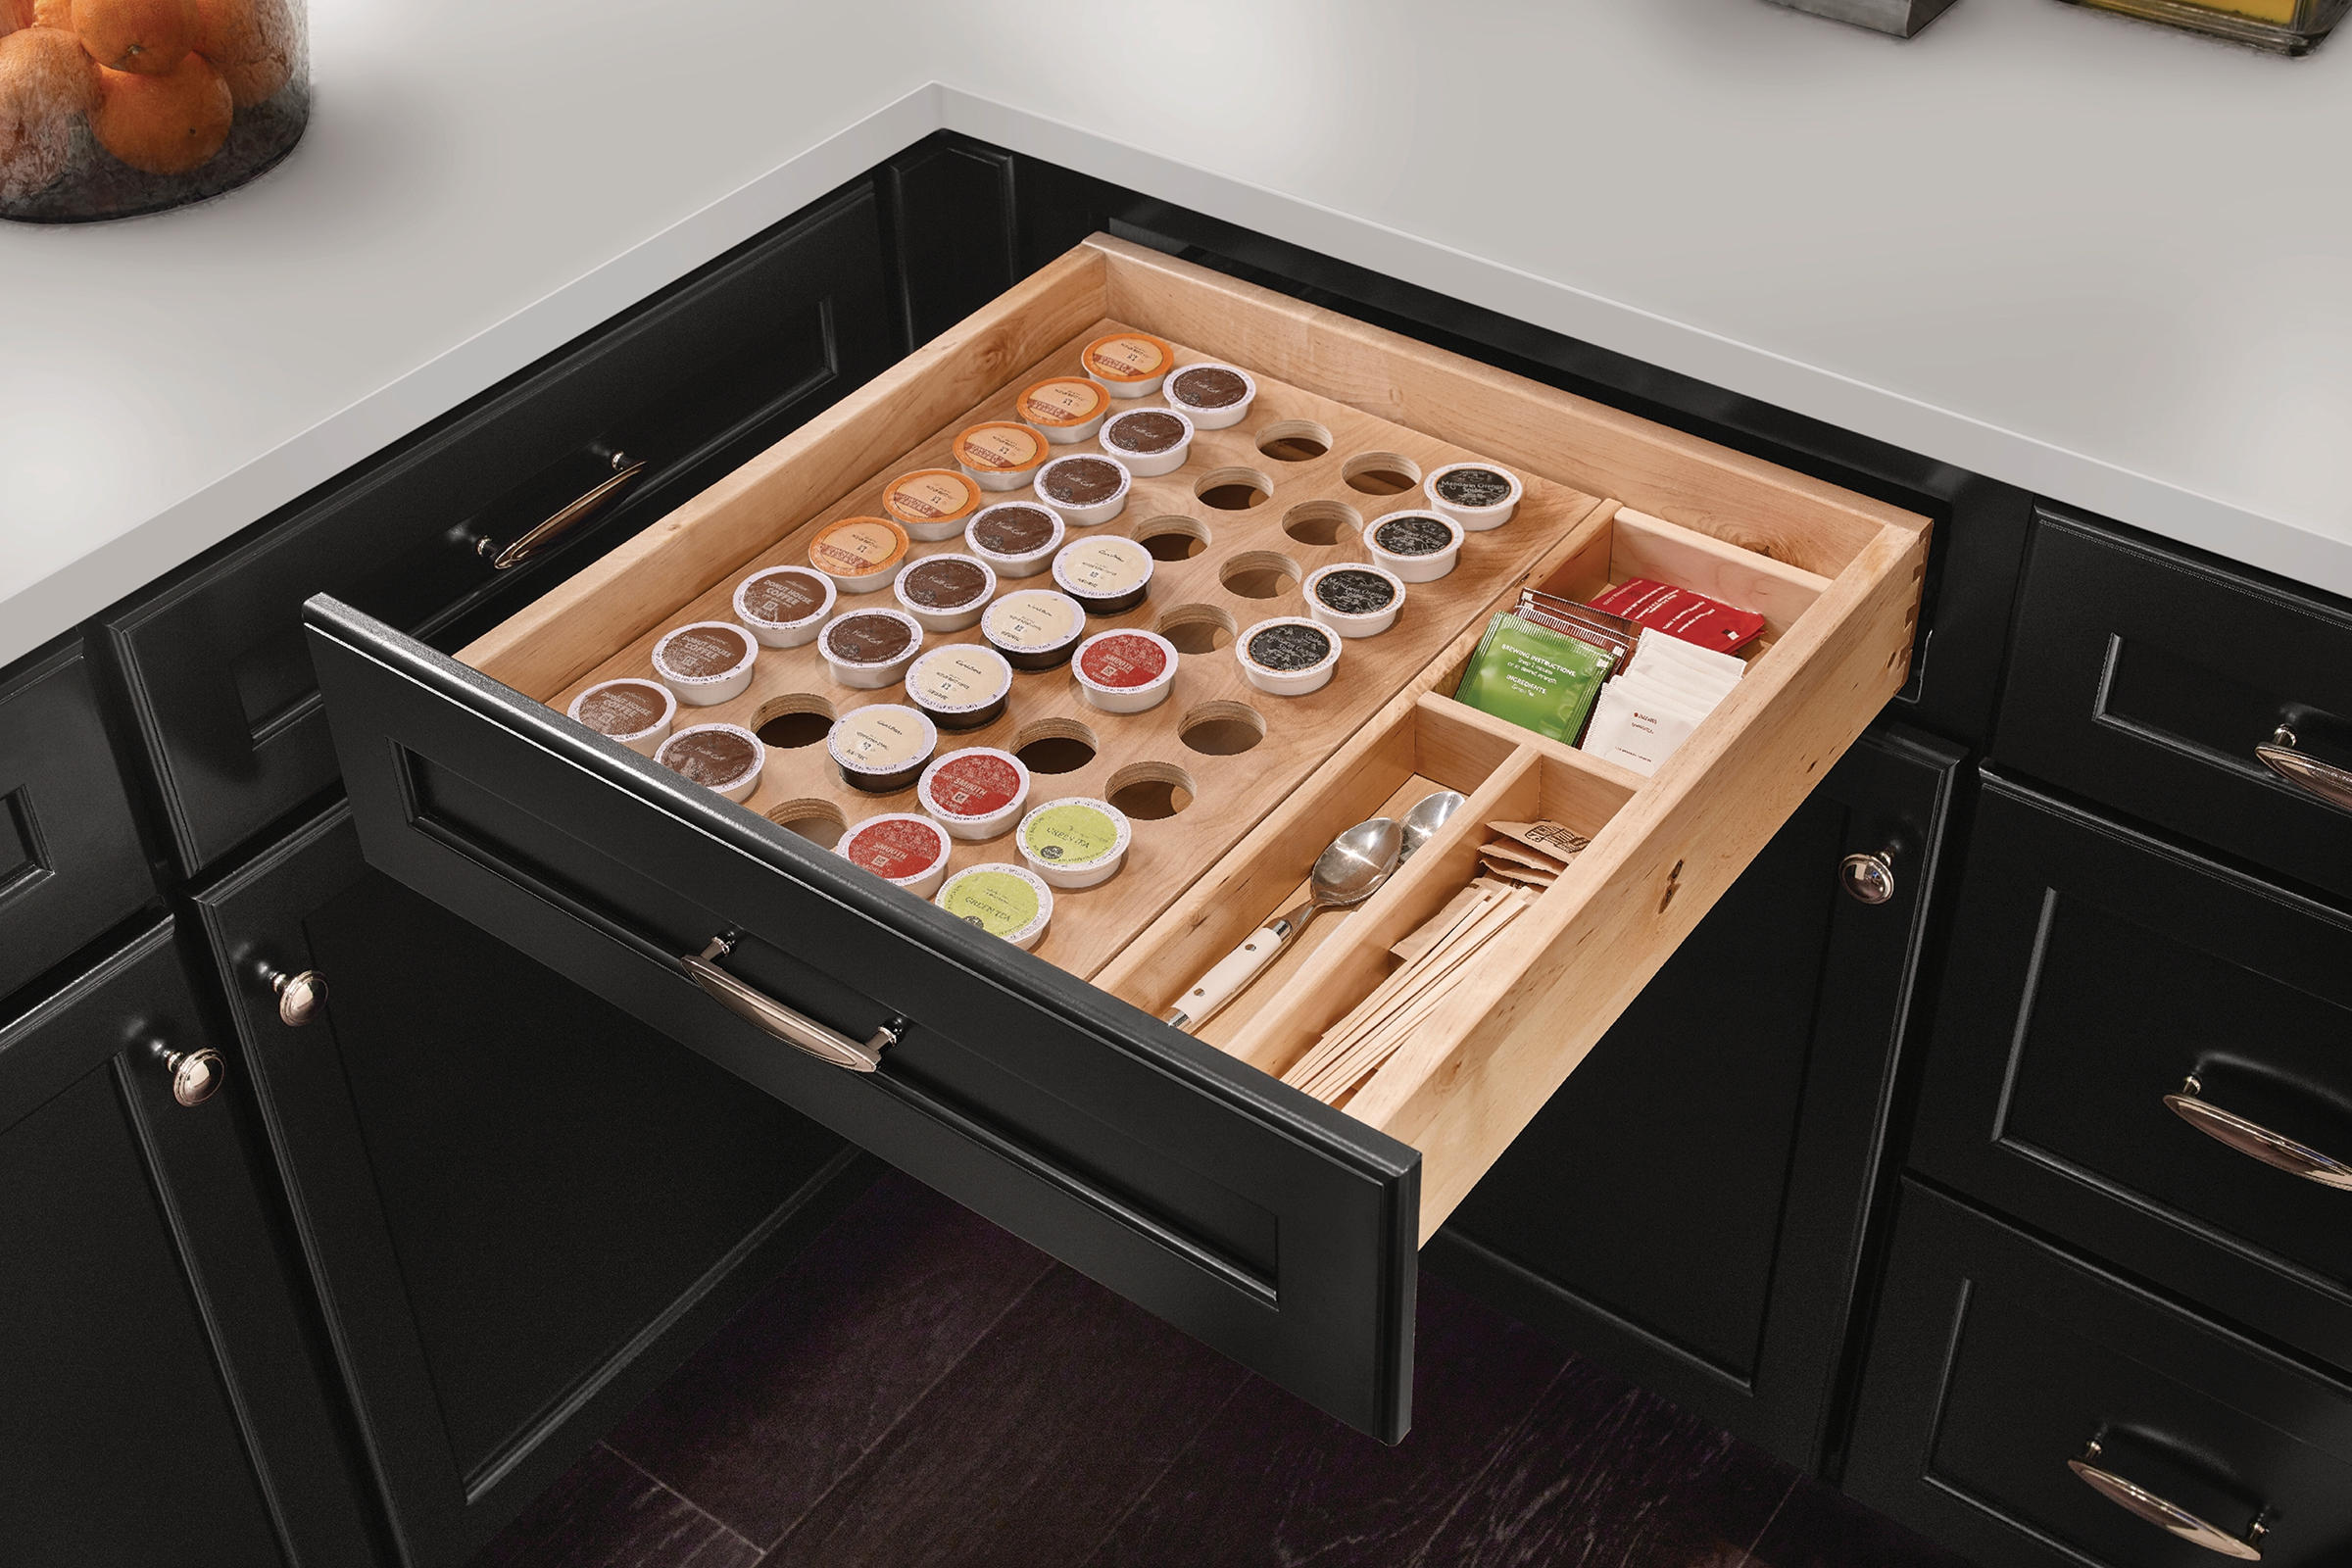 Cabinet drawer used as coffee and tea station by inserting KraftMaid K-Cup Organizer Drawer insert